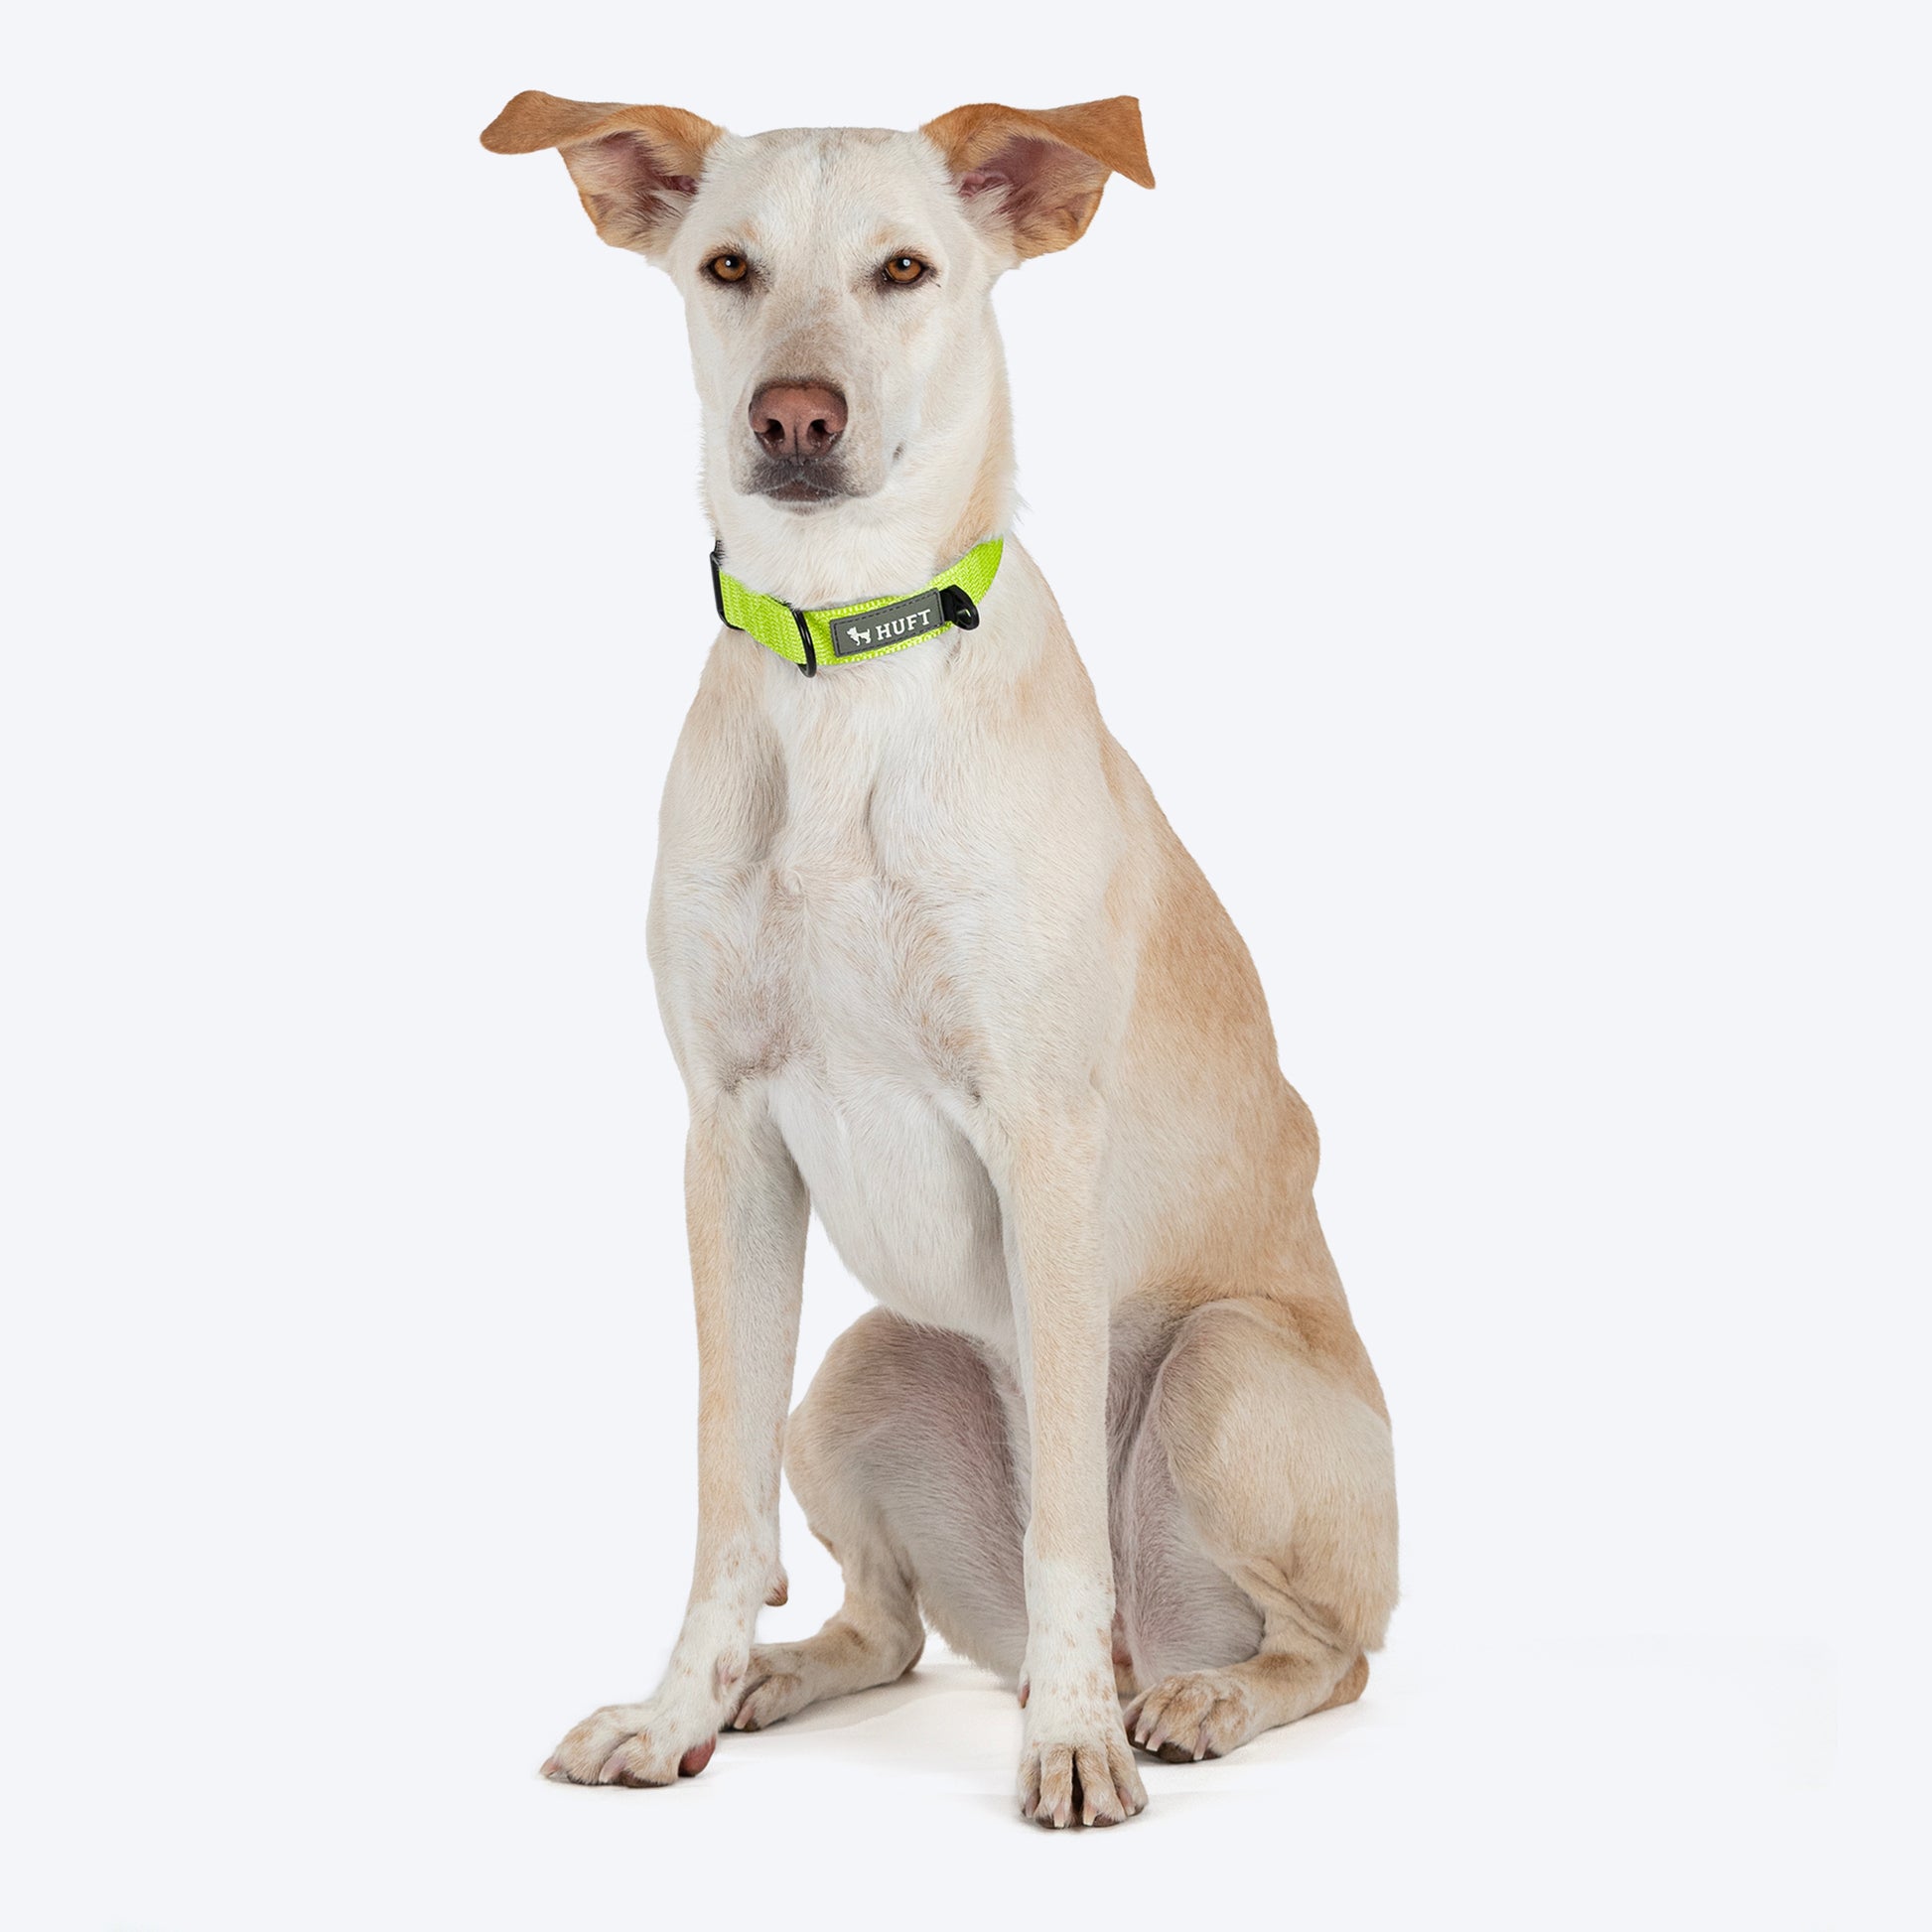 HUFT Basics Dog Collar - Neon Green - Heads Up For Tails